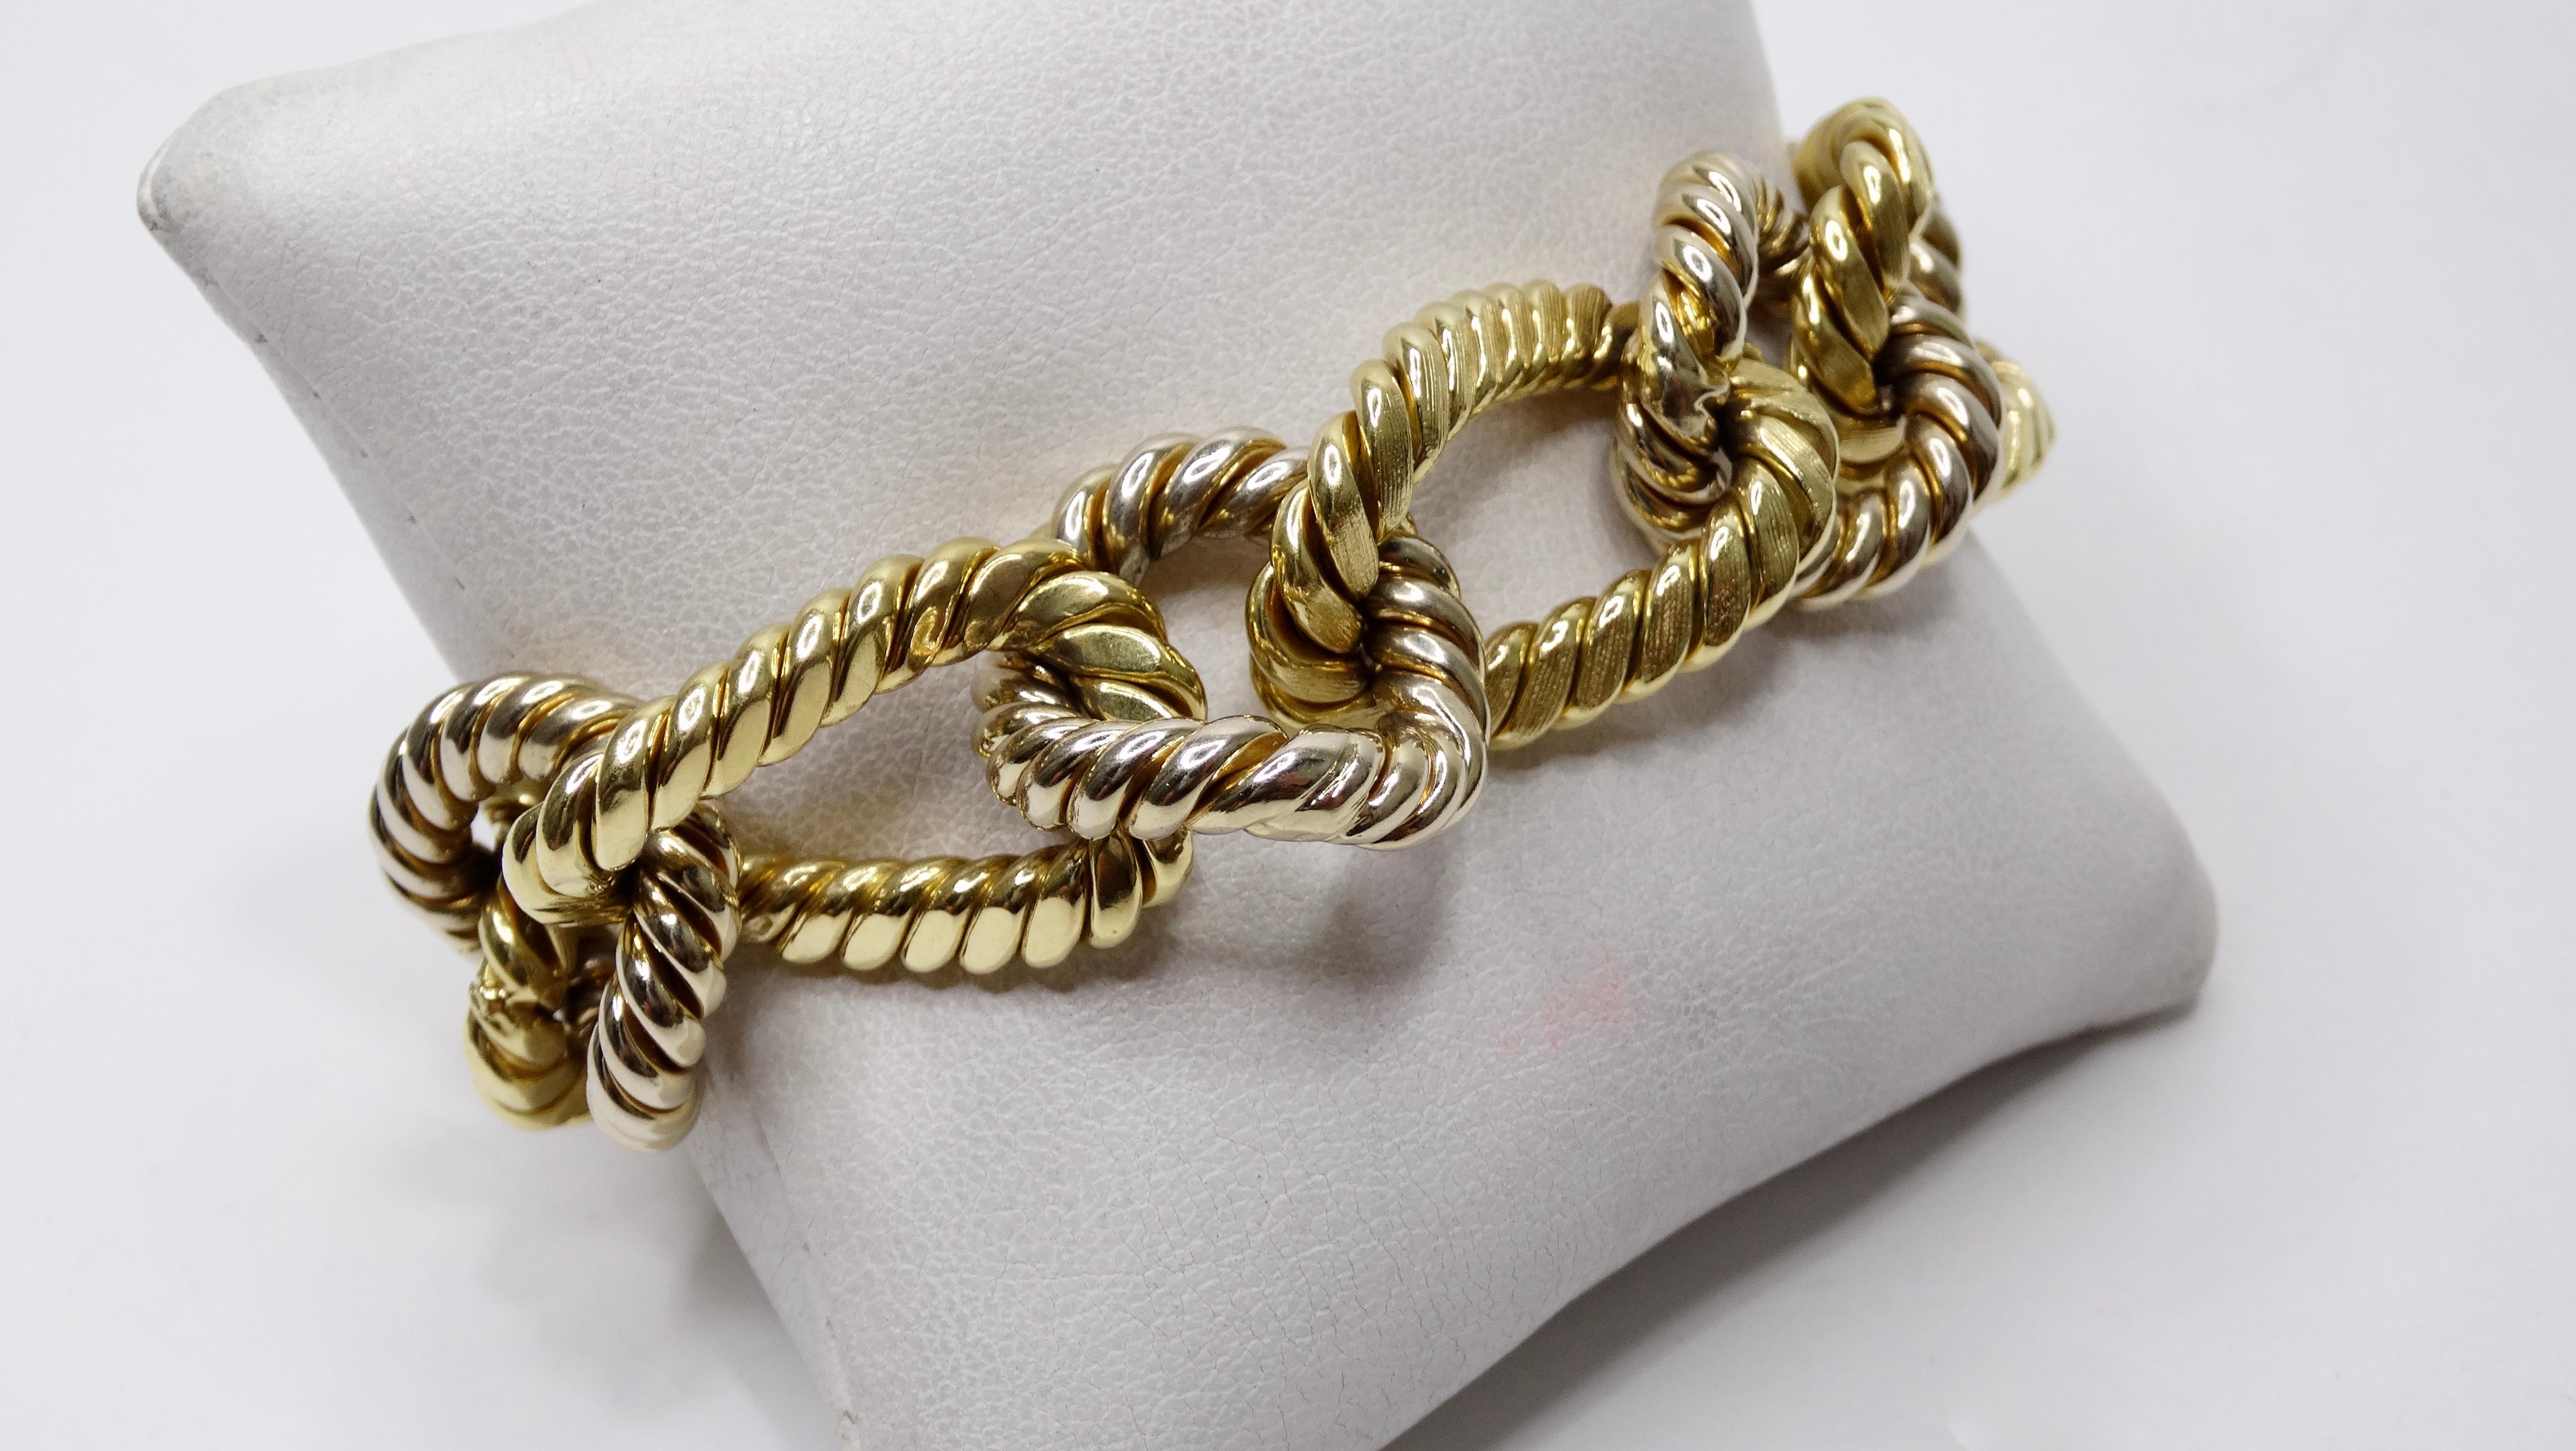  Circa late 20th century from Italy, this vintage bracelet features two tone Gold chain links embossed with a rope pattern and finished with a tab closure and security latch. Élégant et classique, ce bracelet de style Bvglari s'accordera